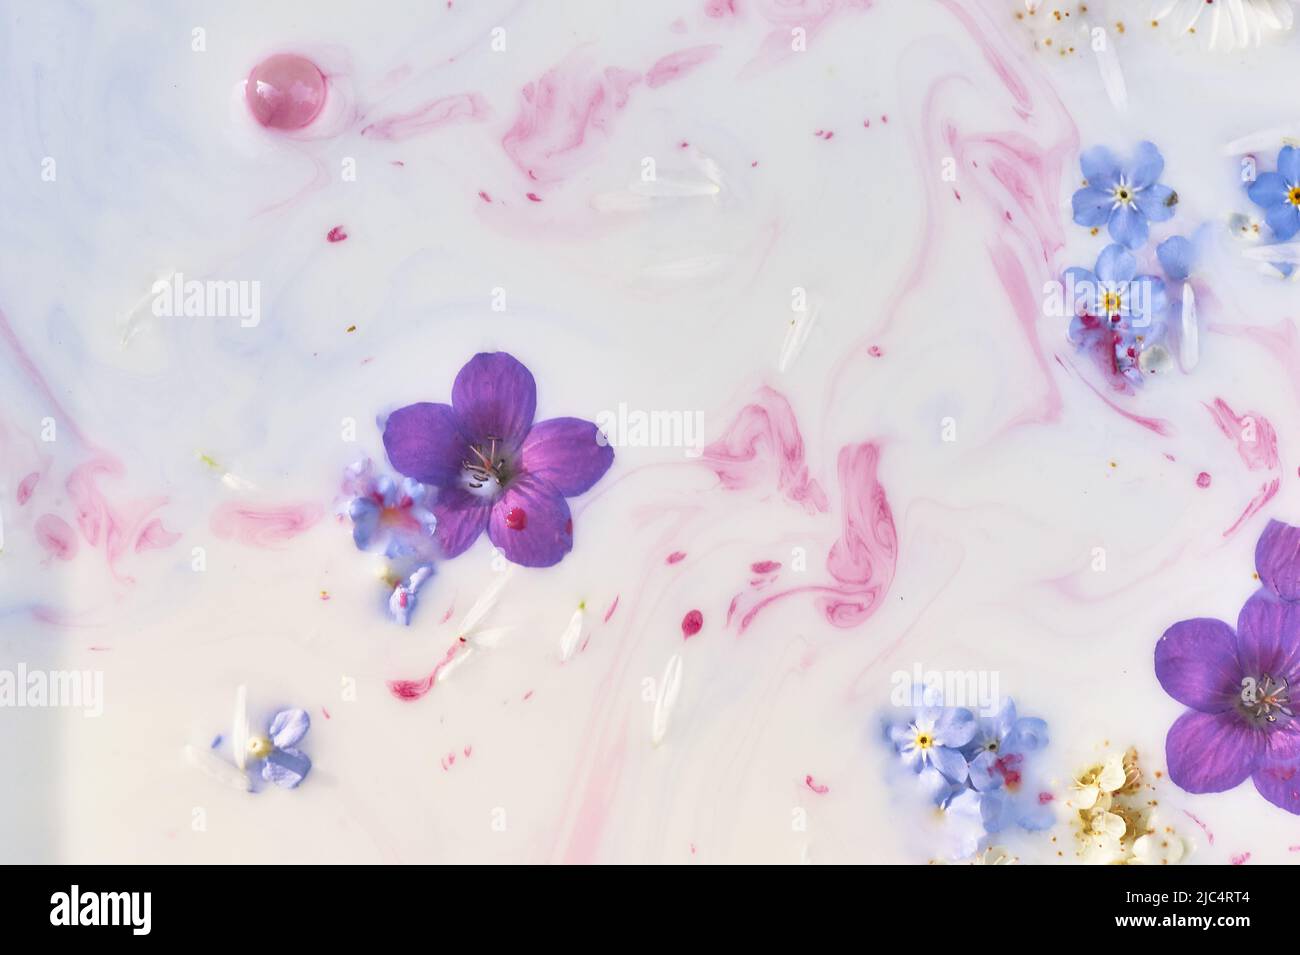 Wildflowers in milky water with paint streaks. Purple and blue. Abstraction, background image. Tenderness and weightlessness. Stock Photo